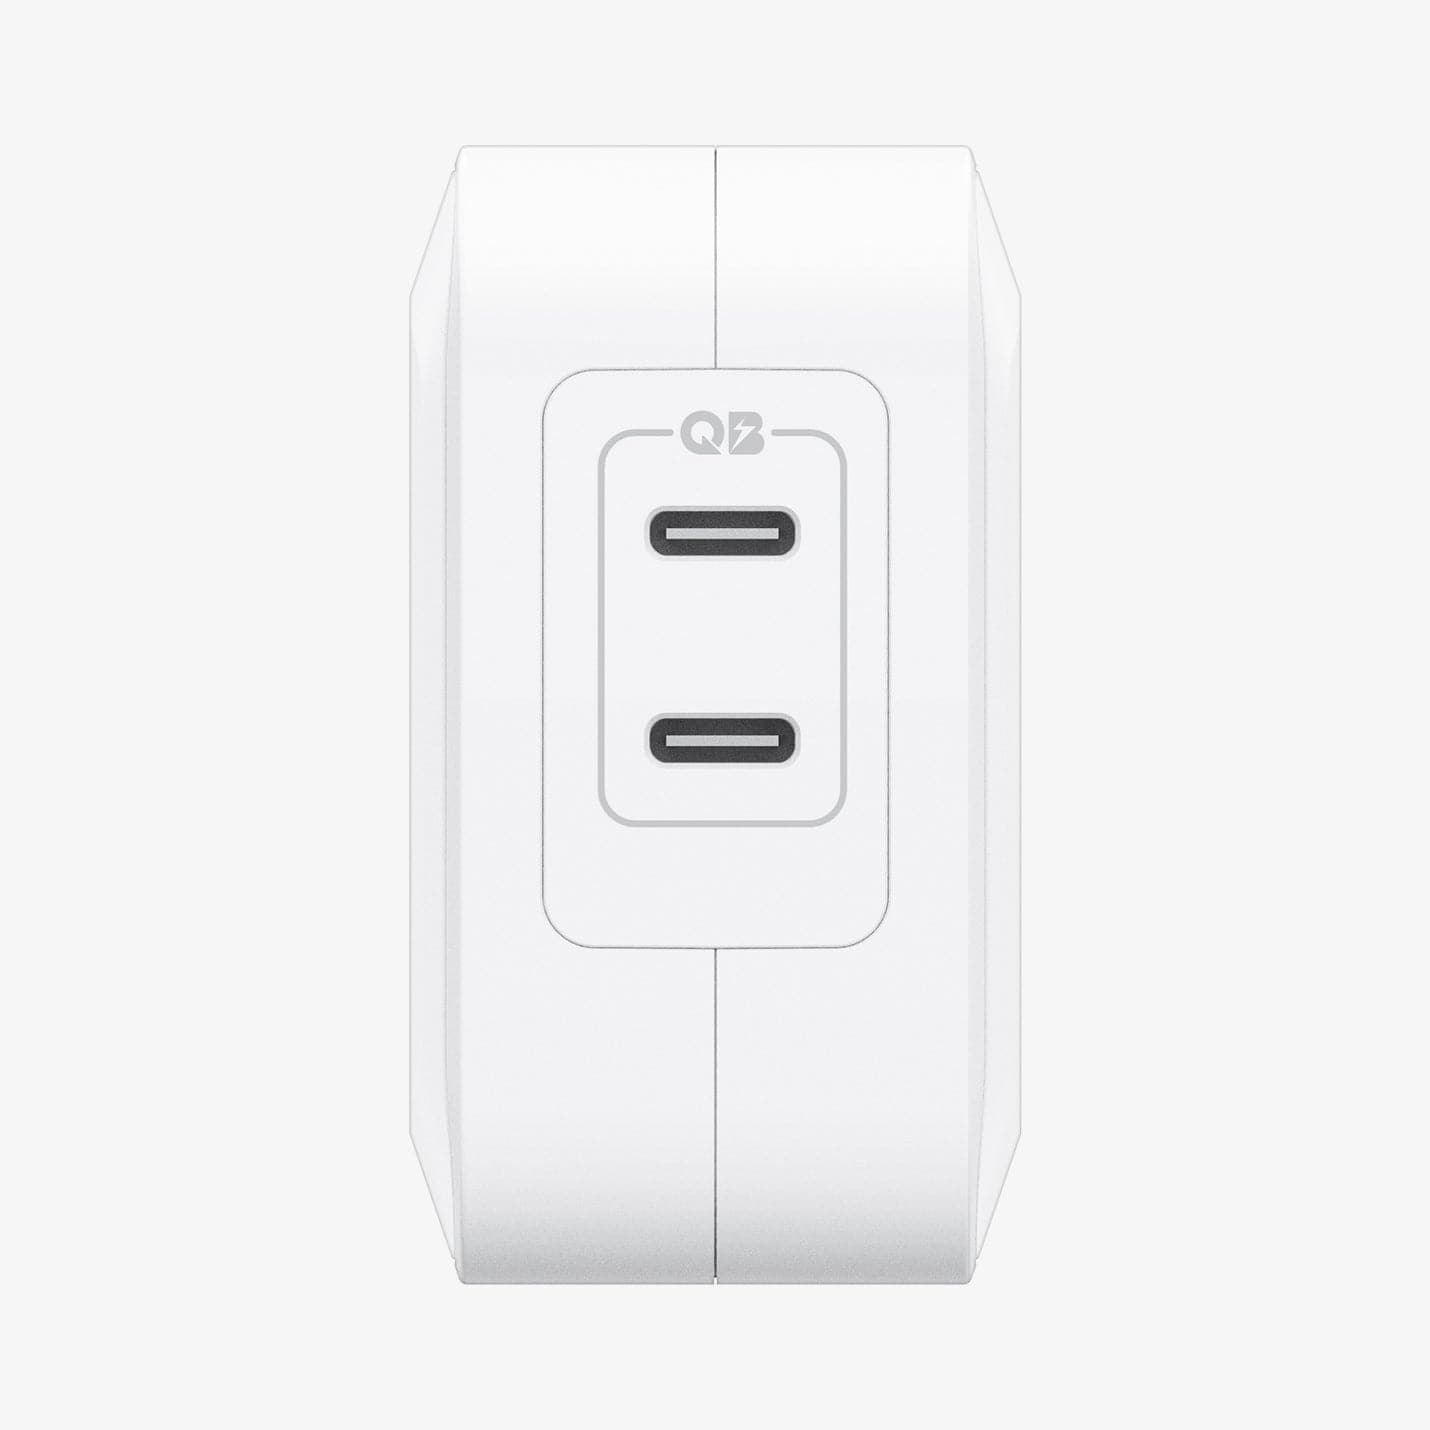 ACH02122 - ArcStation™ Pro 100W Wall Charger PE2006 in white showing the front with charging ports